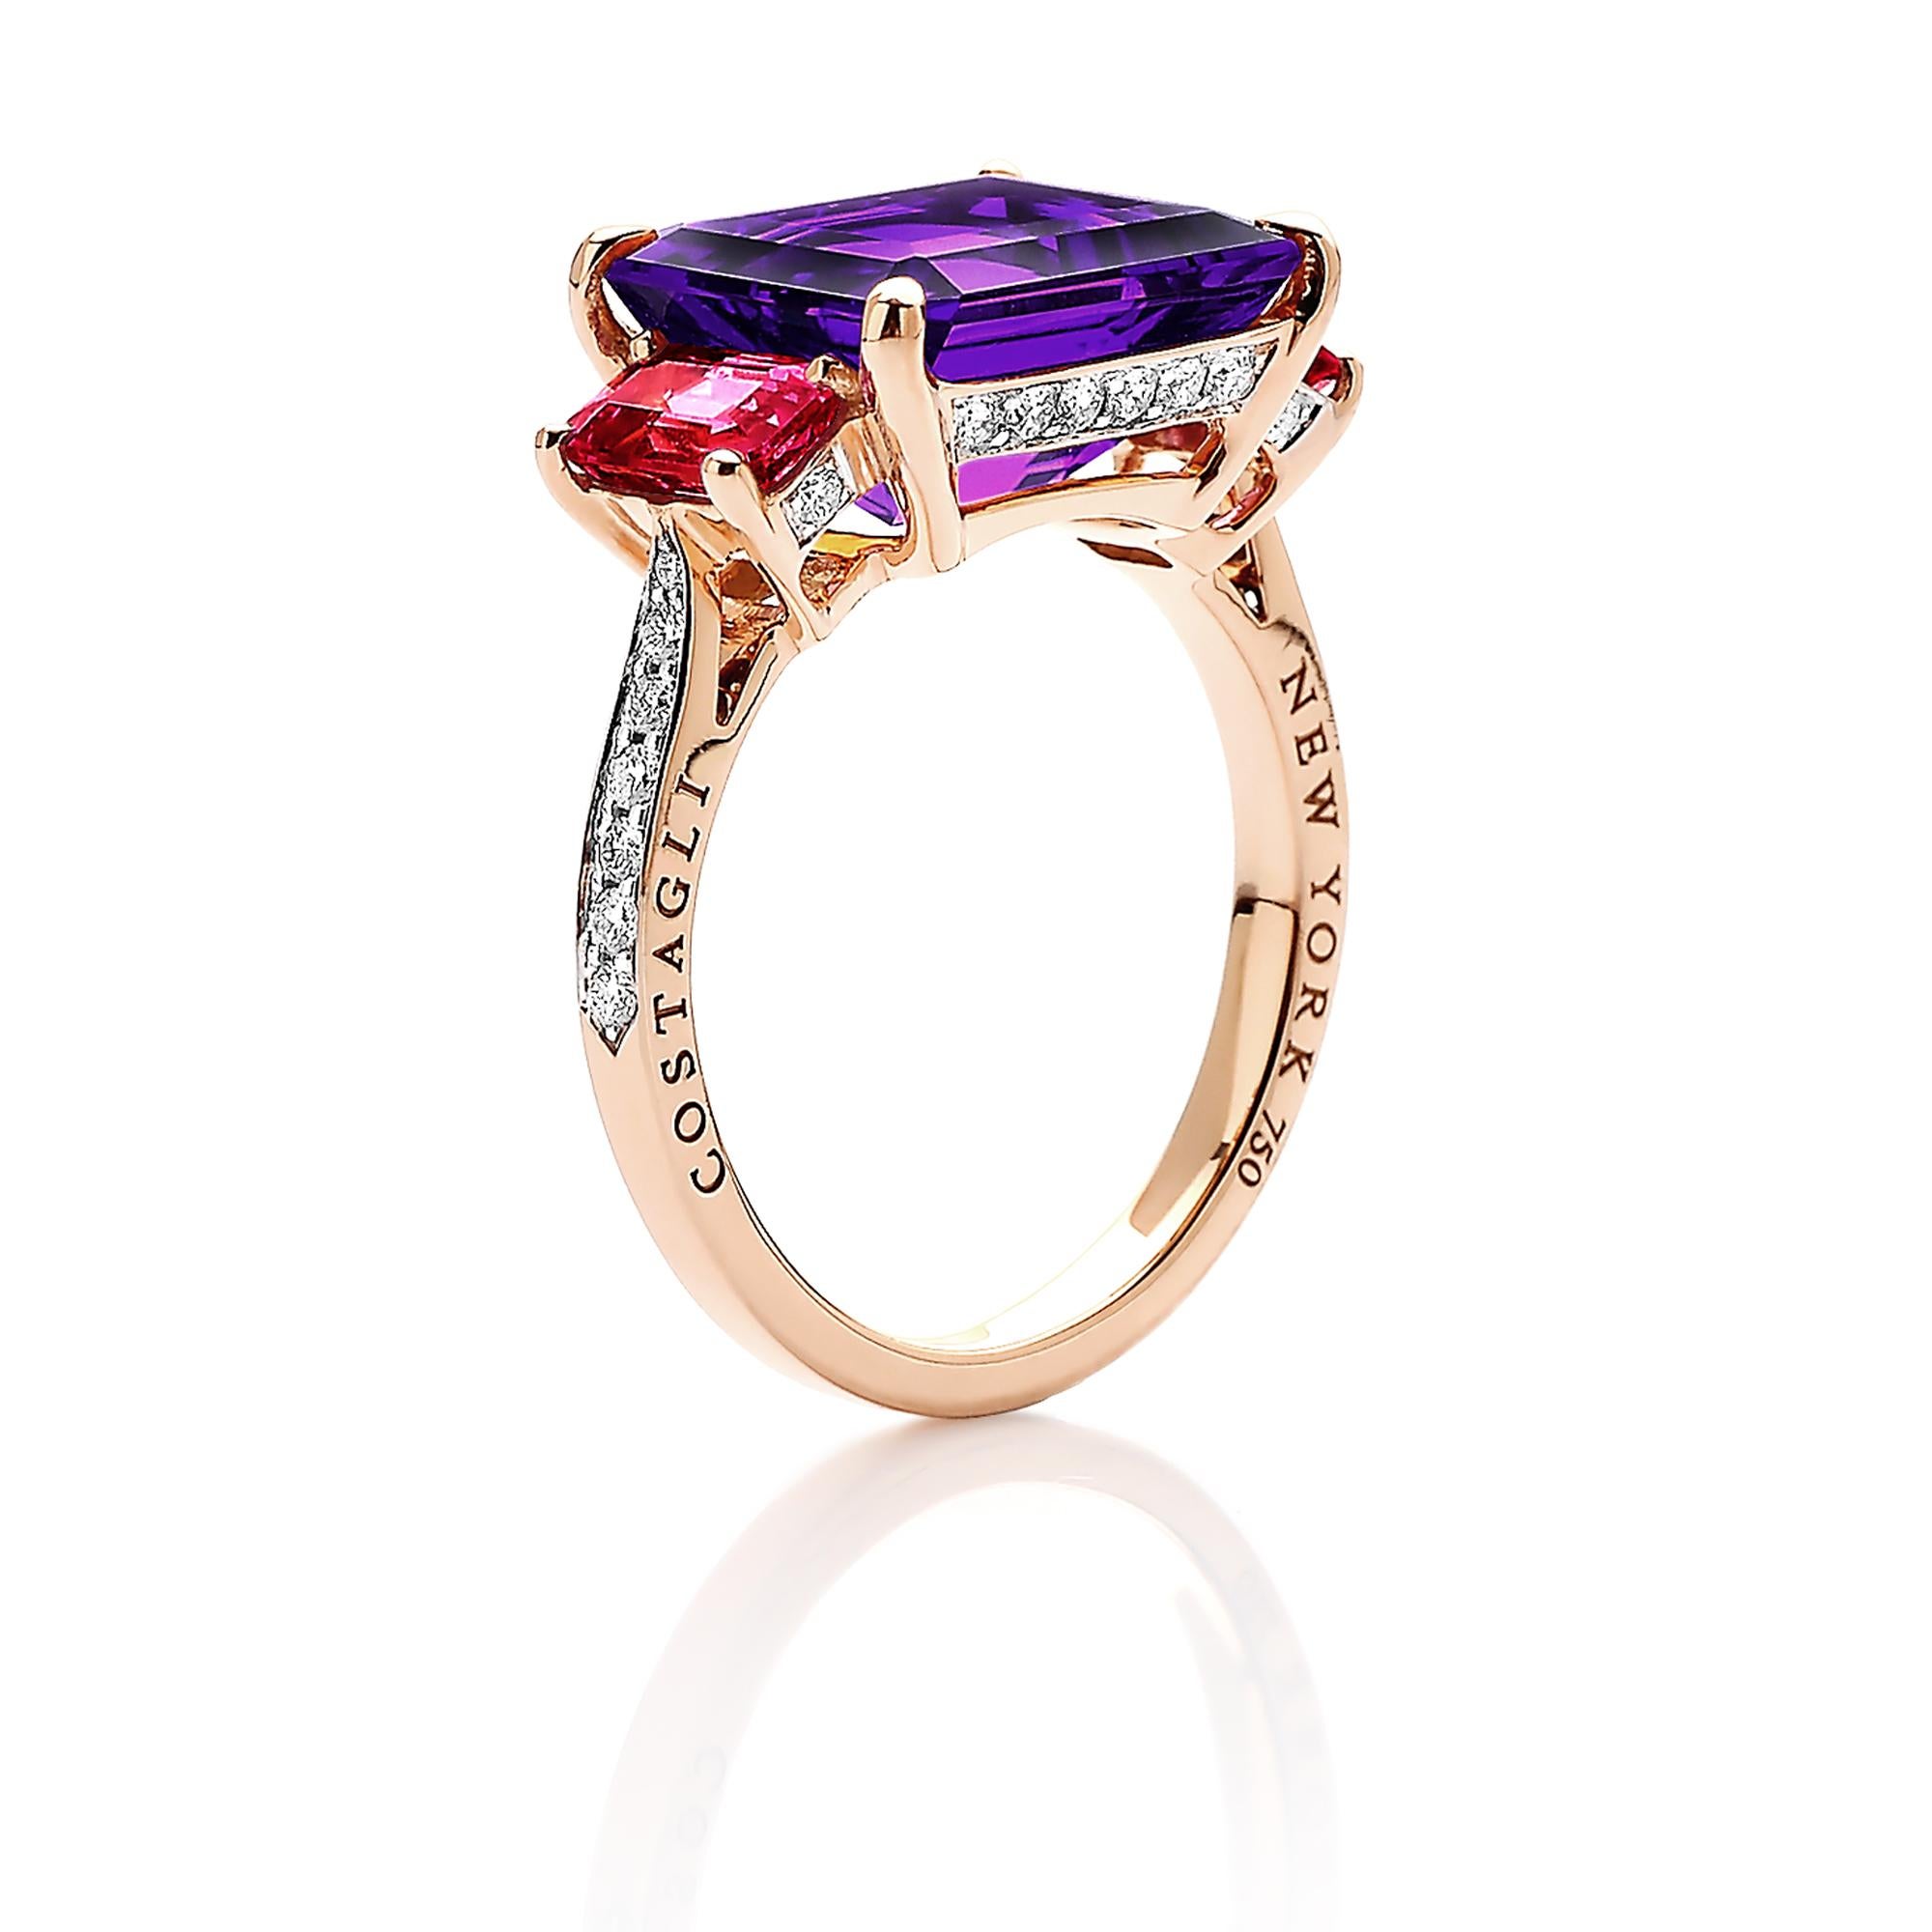 The signature Paolo Costagli three-stone Florentine ring set in 18 karat rose gold with an emerald-cut amethyst flanked by emerald-cut rubies and diamond detail.

Inspired by the Garden of the Iris, the Florentine collection pairs bold color